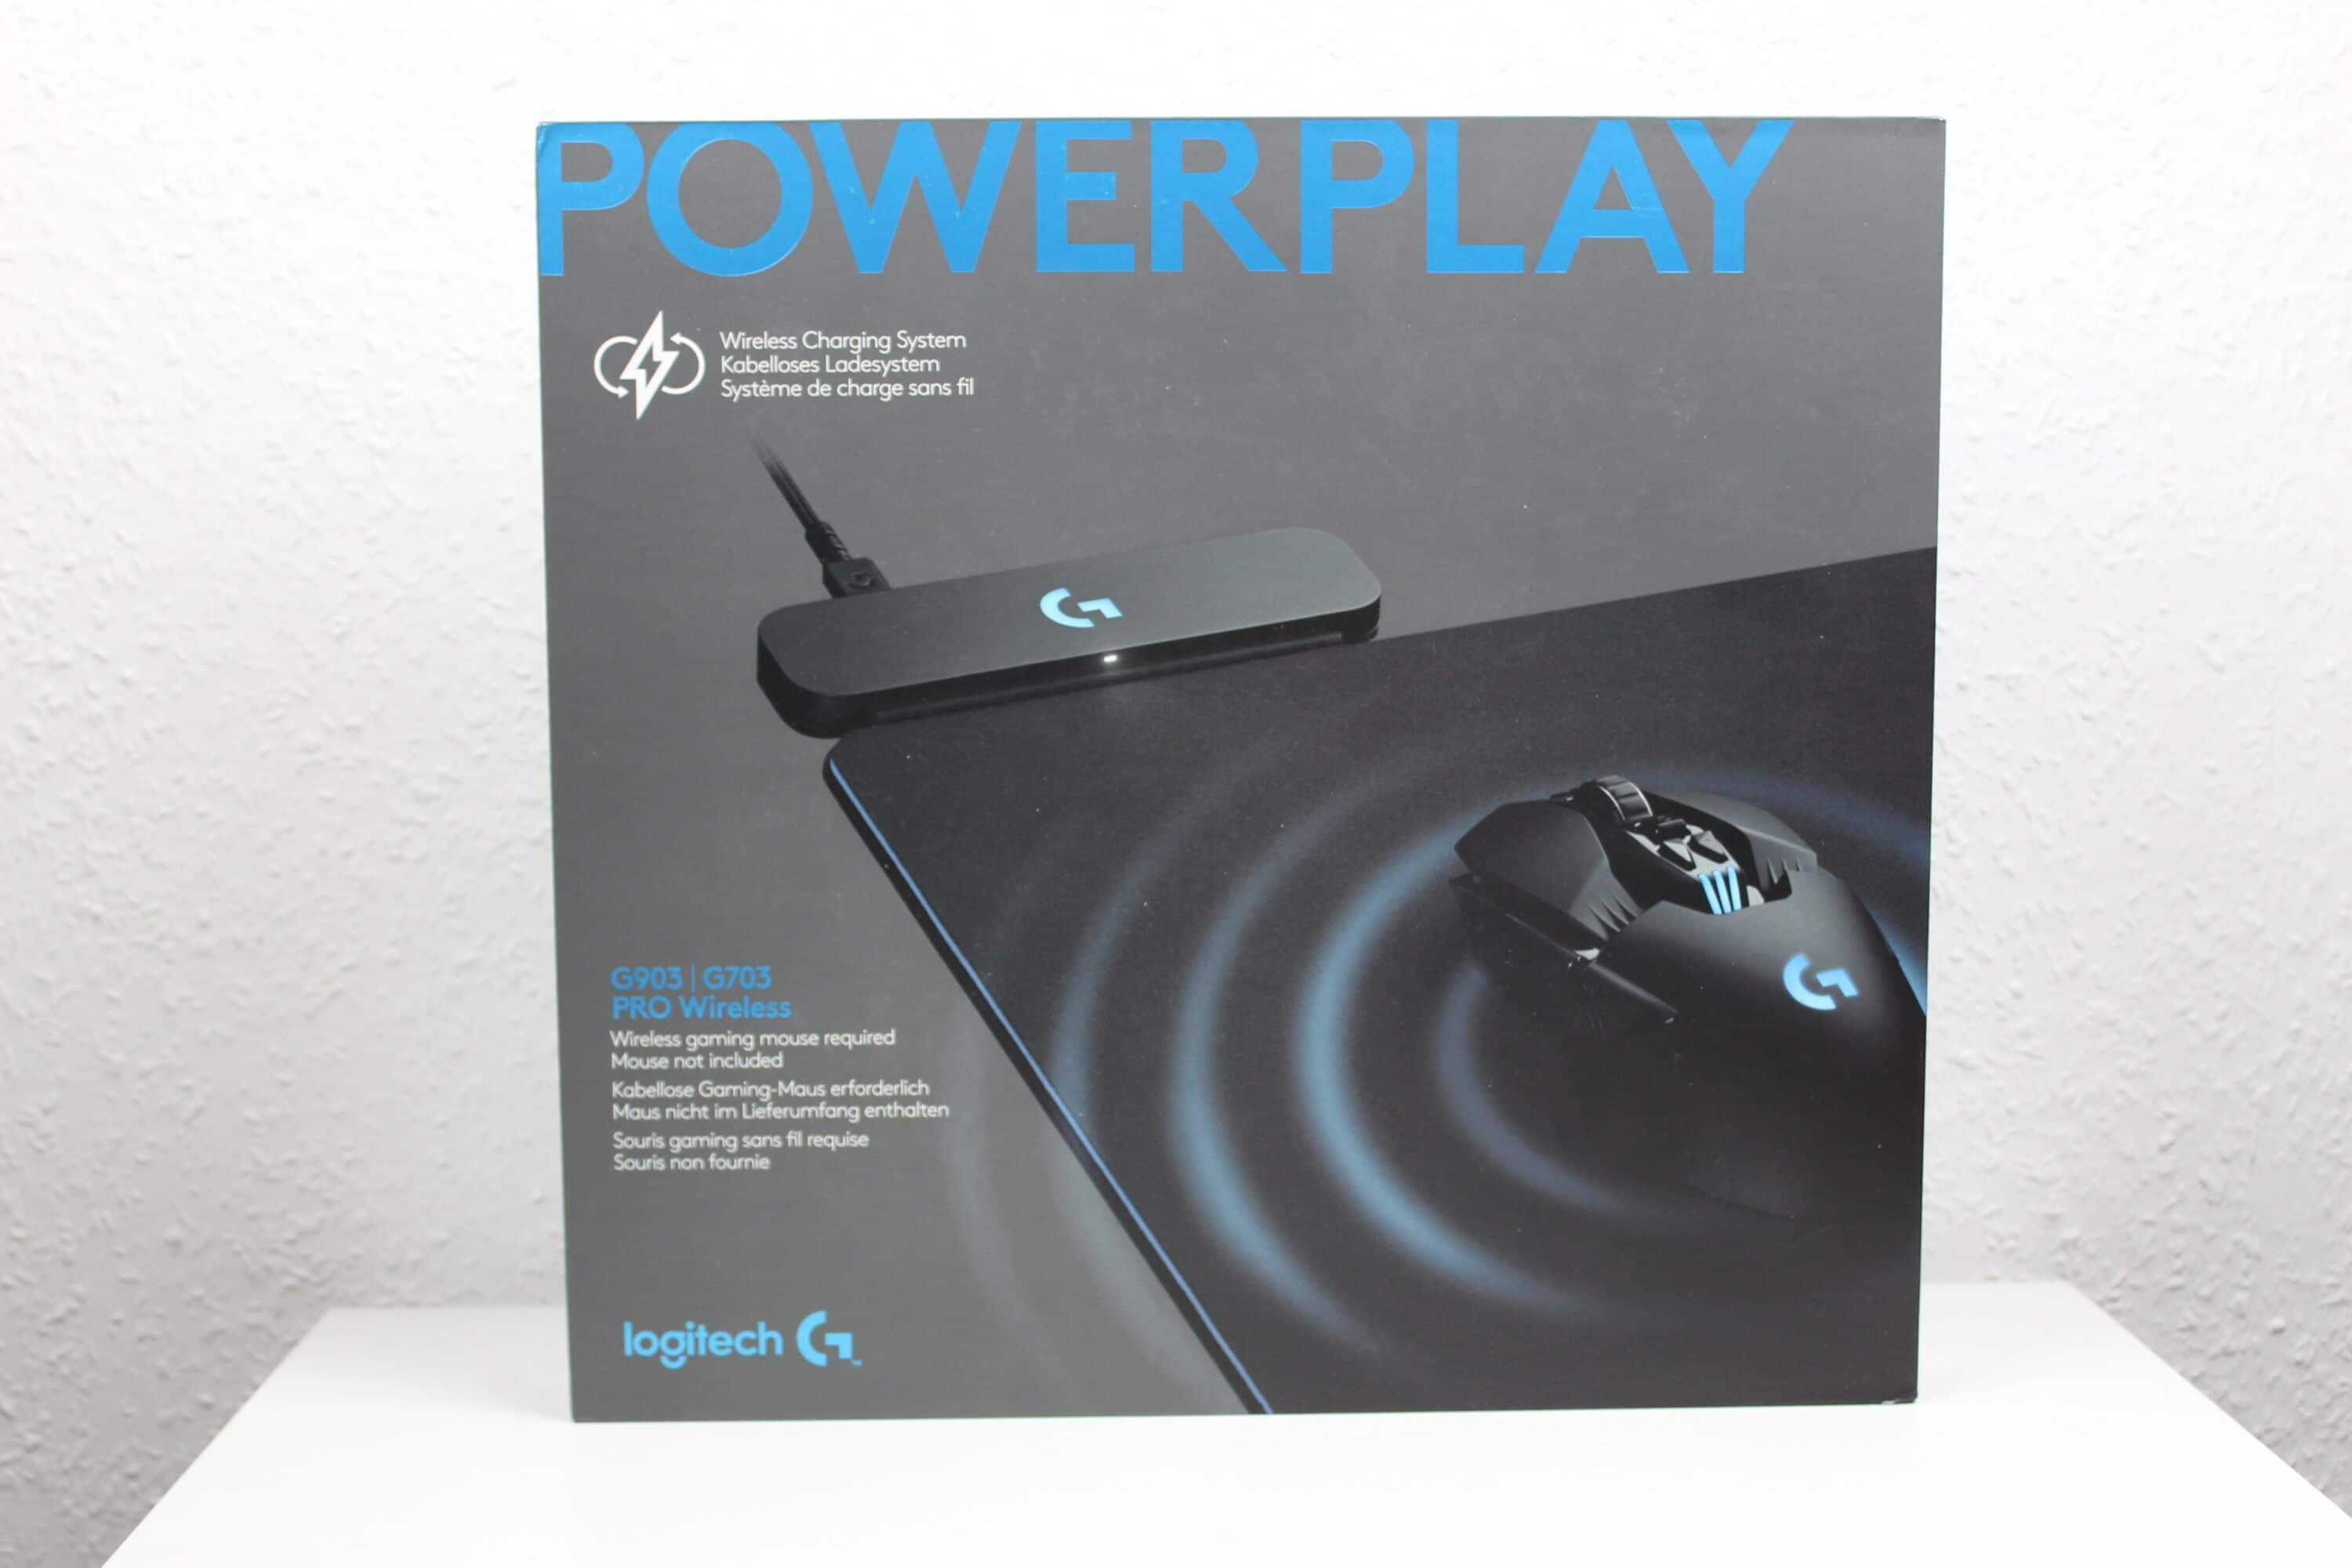 Logitech G Powerplay wireless gaming mouse pad with charging function